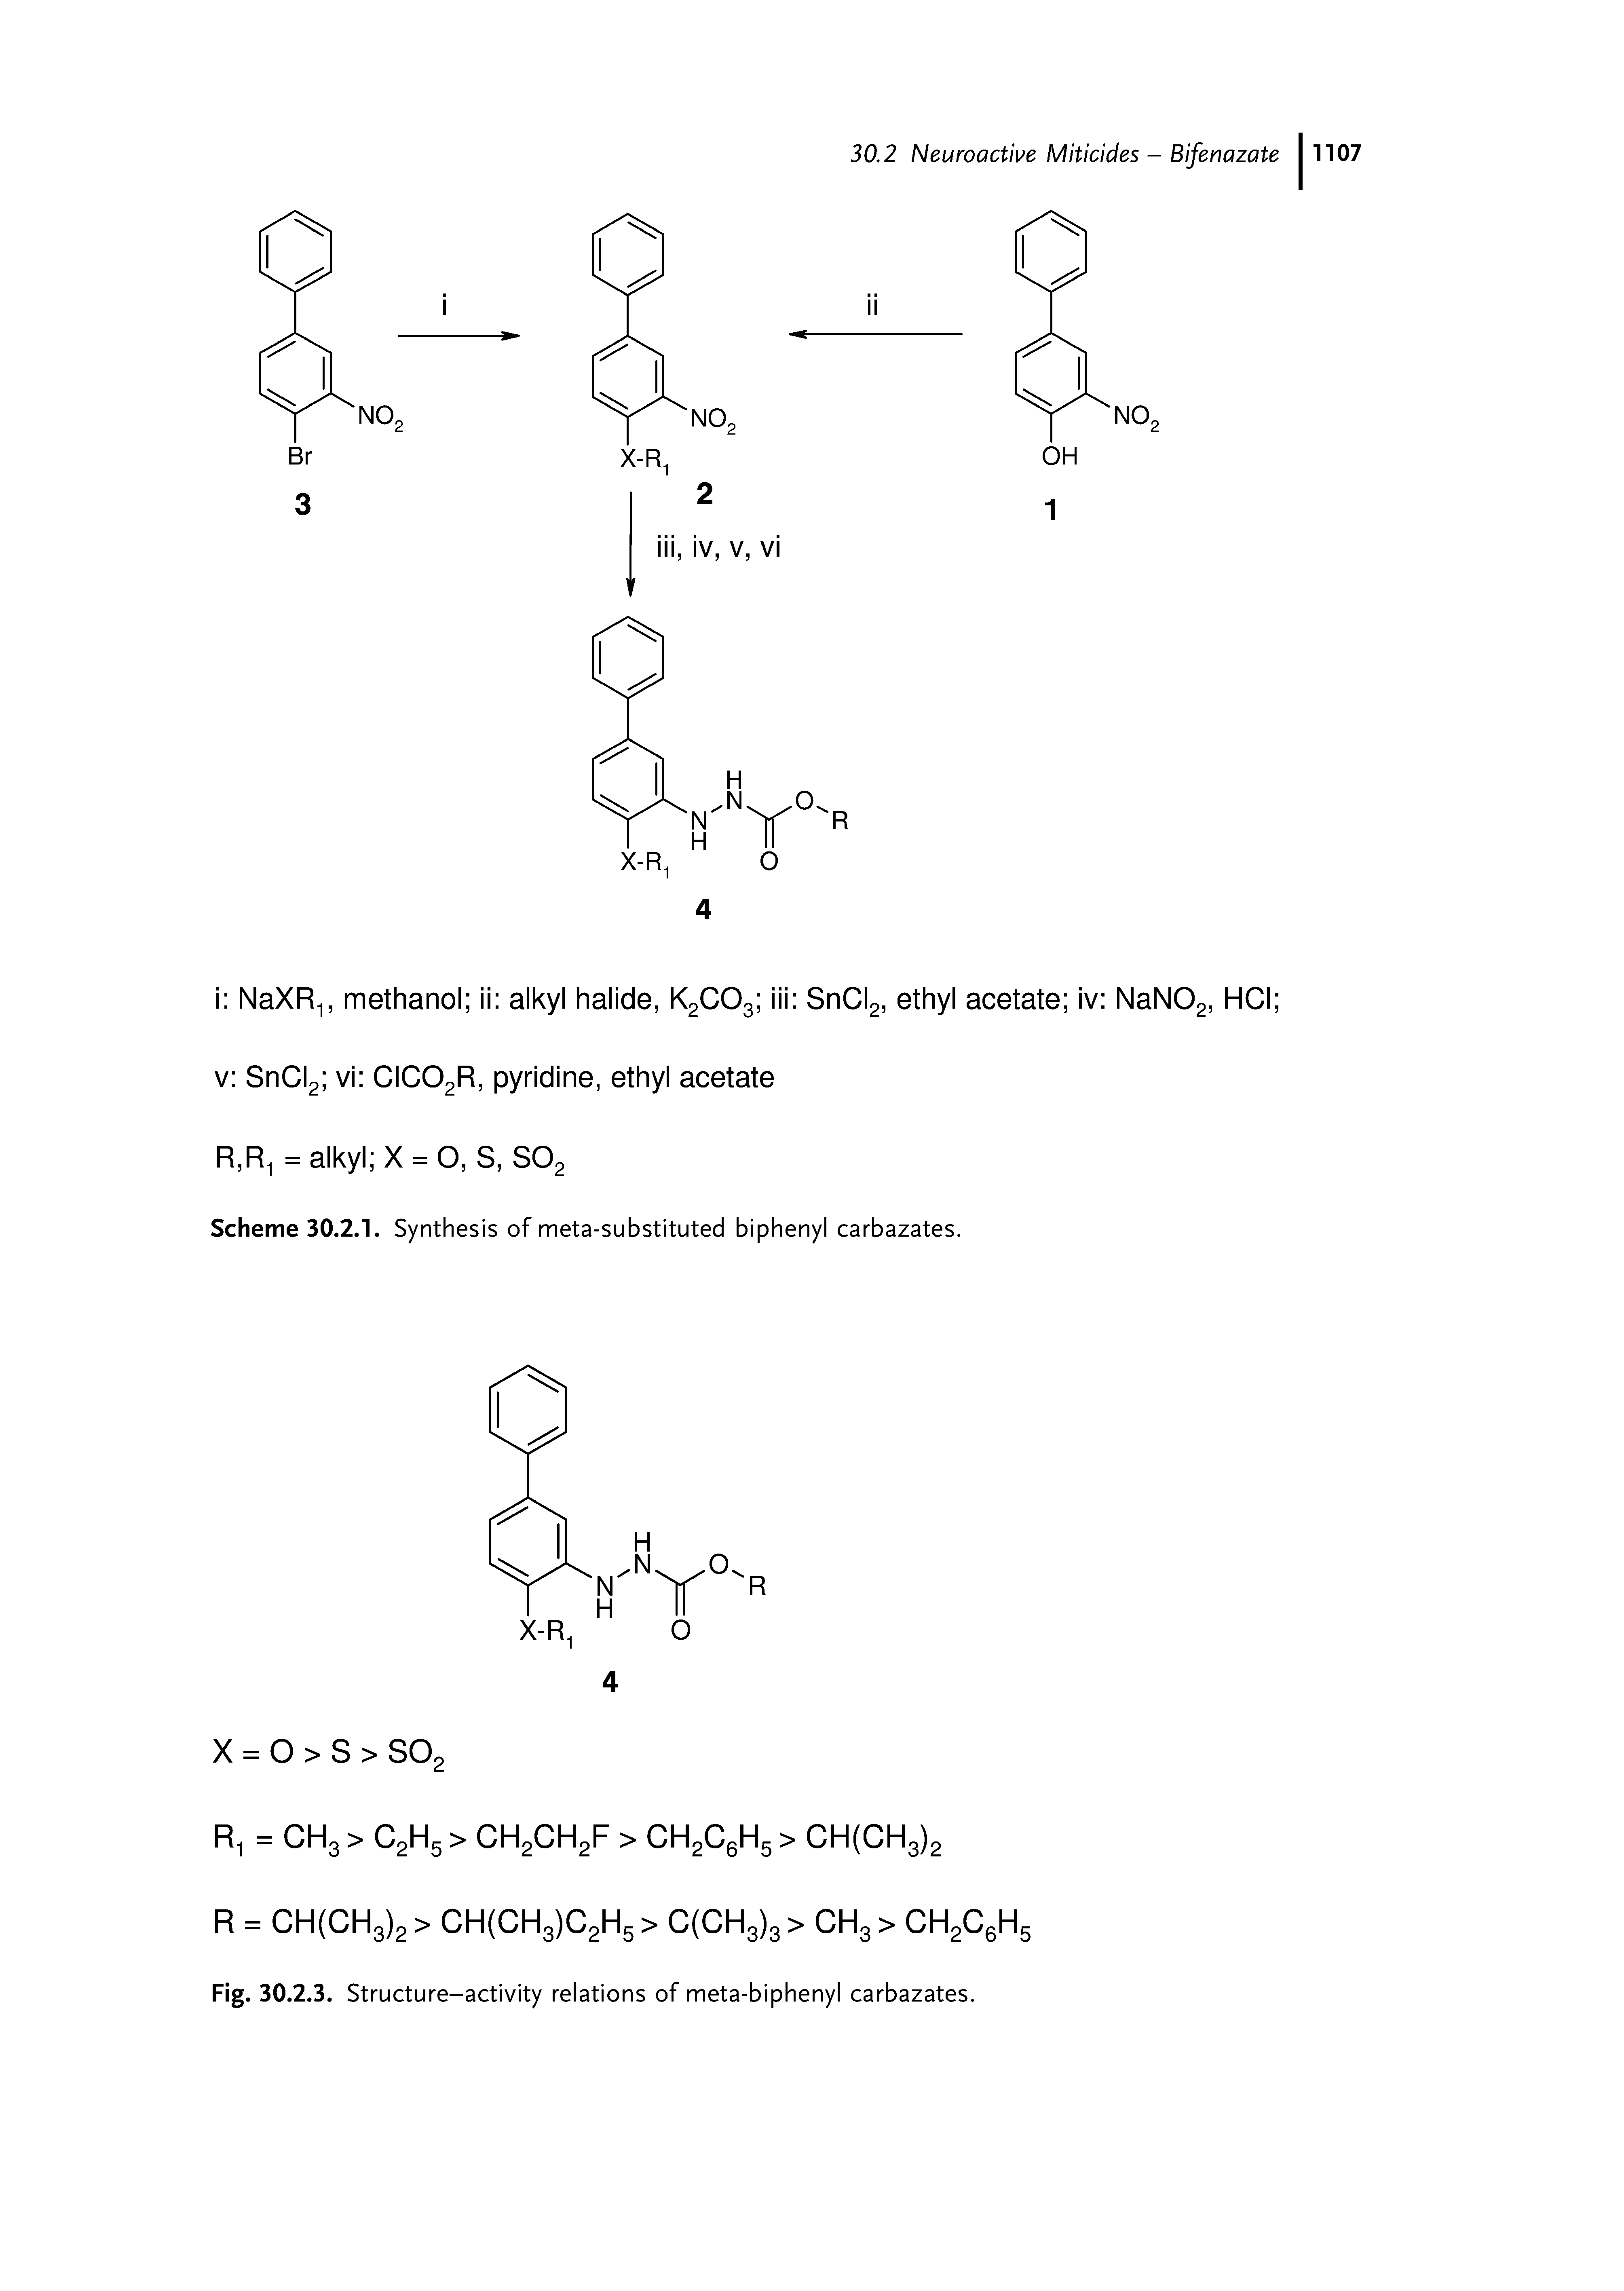 Fig. 30.2.3. Structure-activity relations of meta-biphenyl carbazates.